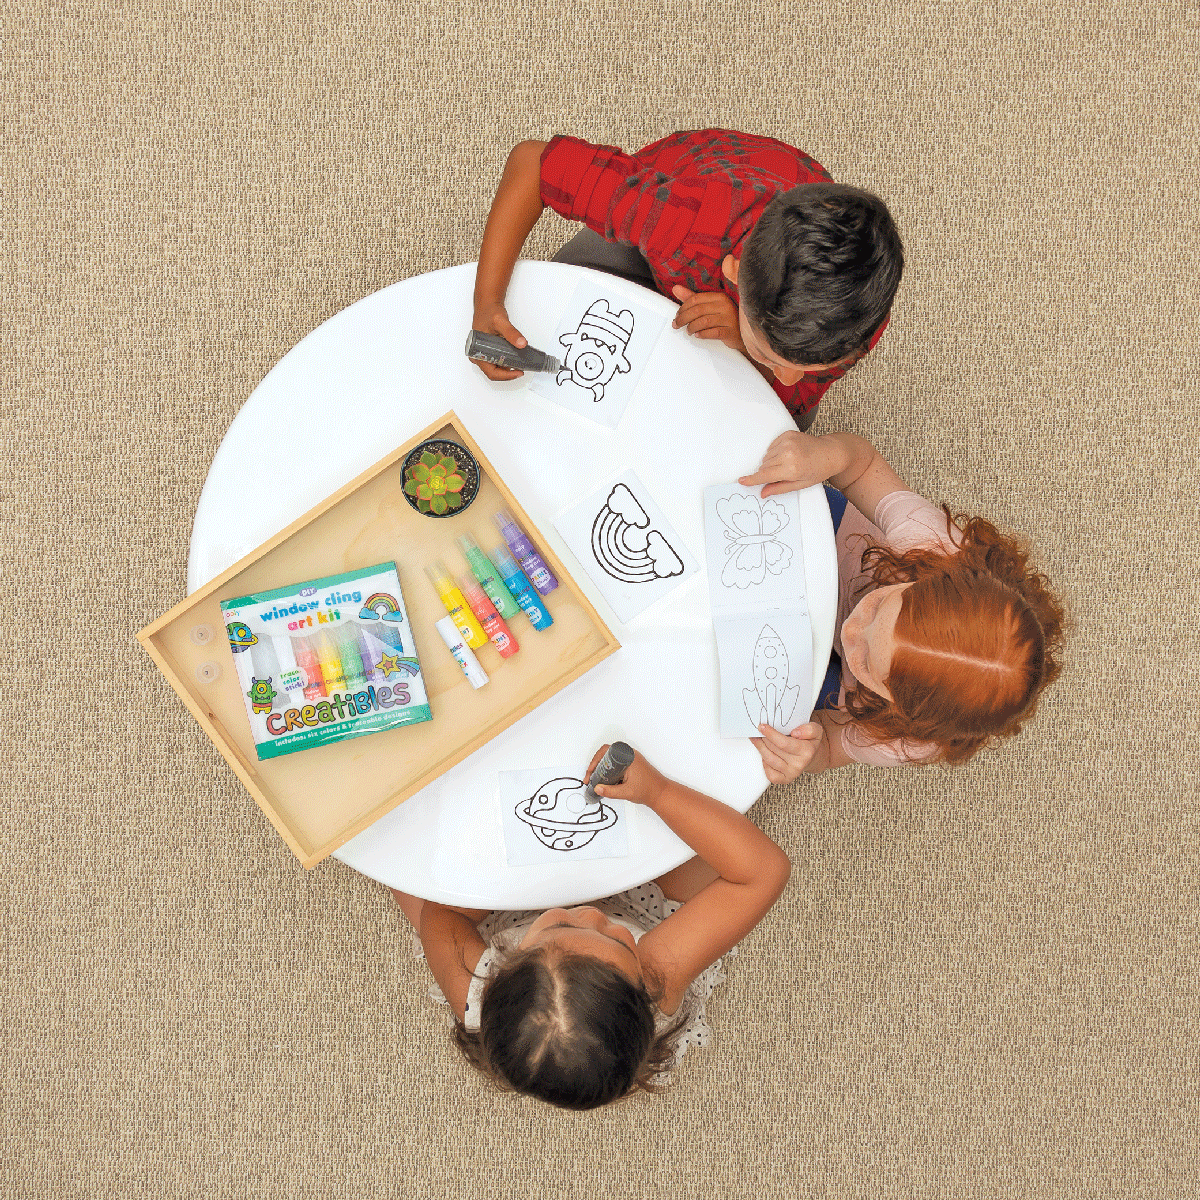 3 kids at a table making window clings with Creatibles DIY Window Cling art kits